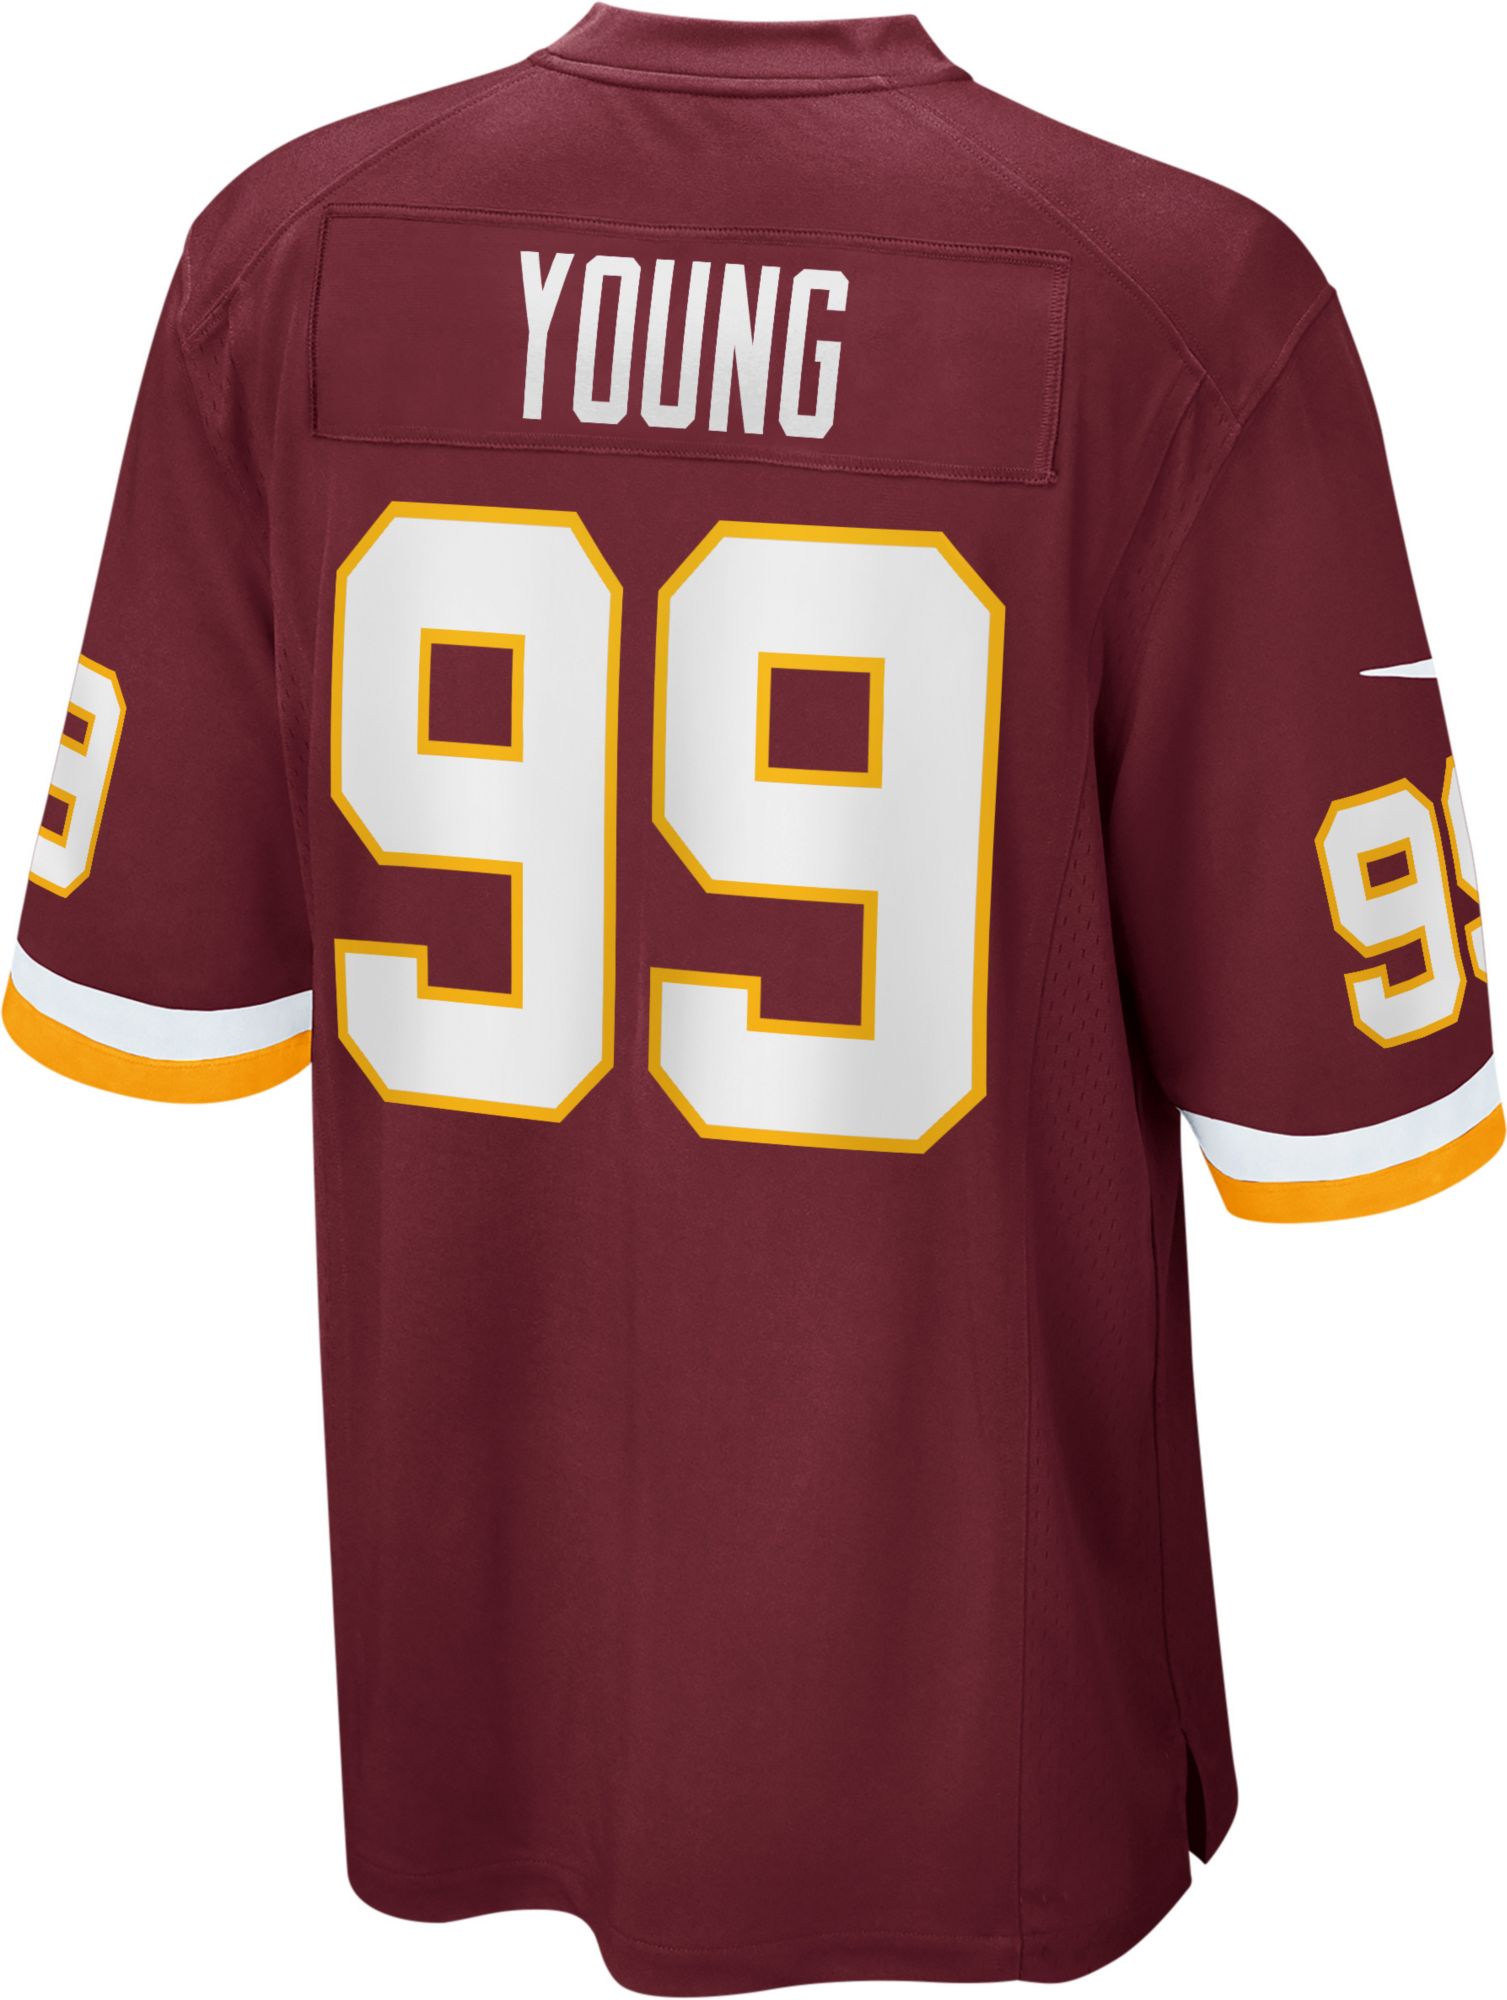 chase young jersey 99